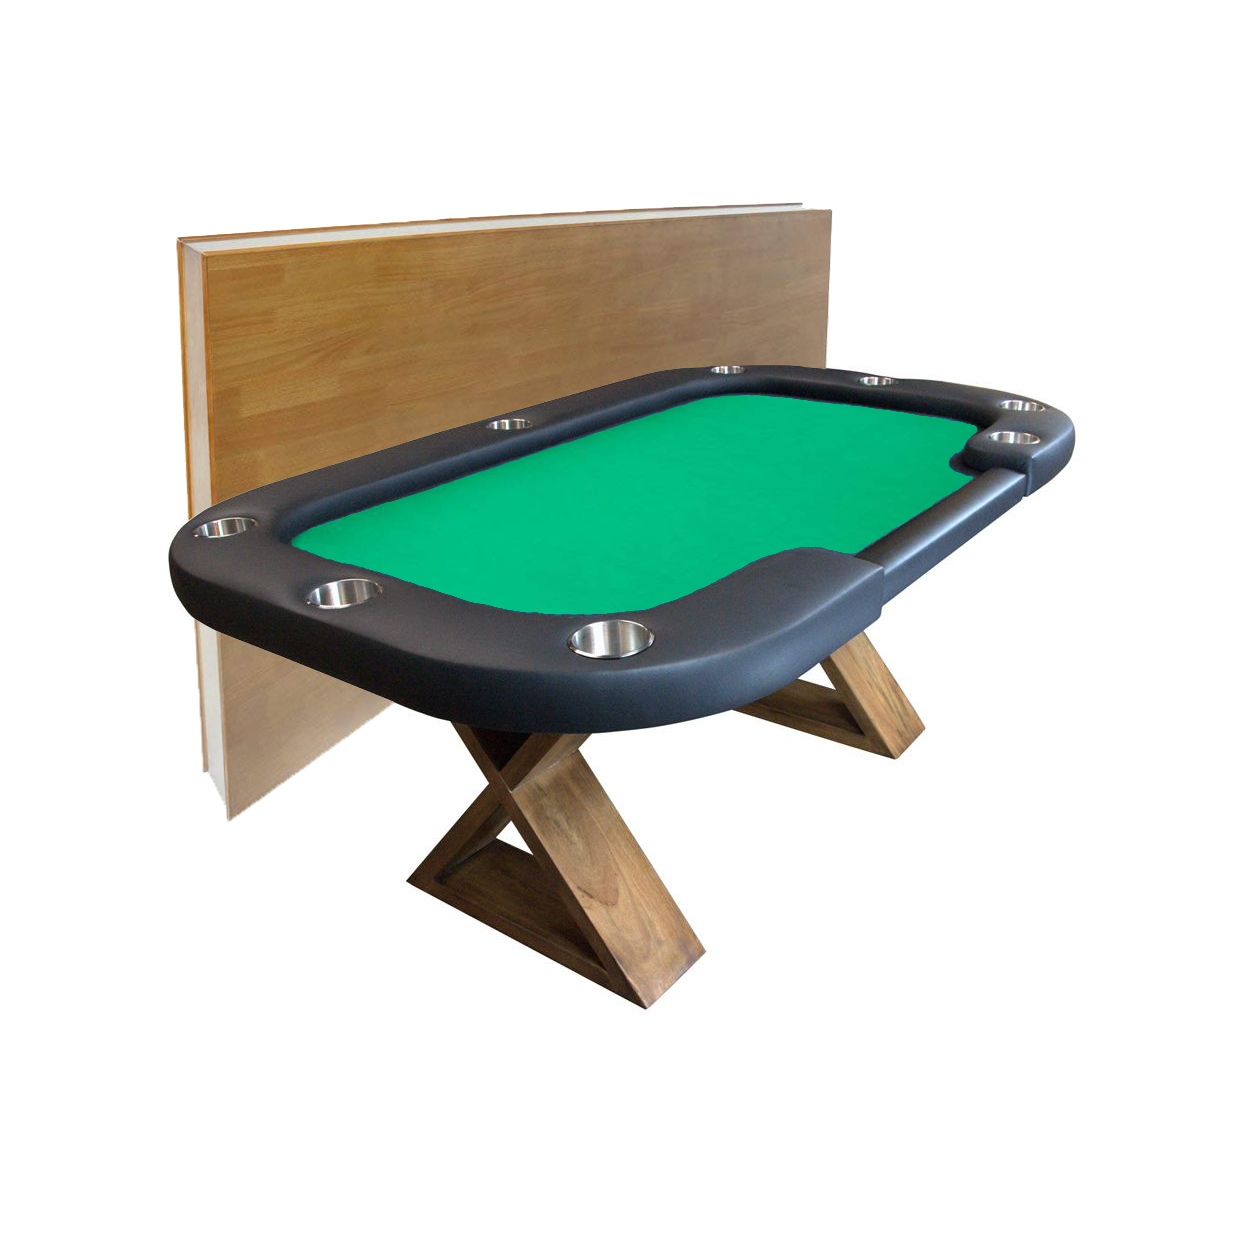 BBO Poker Tables Helmsley Poker Dining Table 8 Person with Dealer Spot - Just Poker Tables